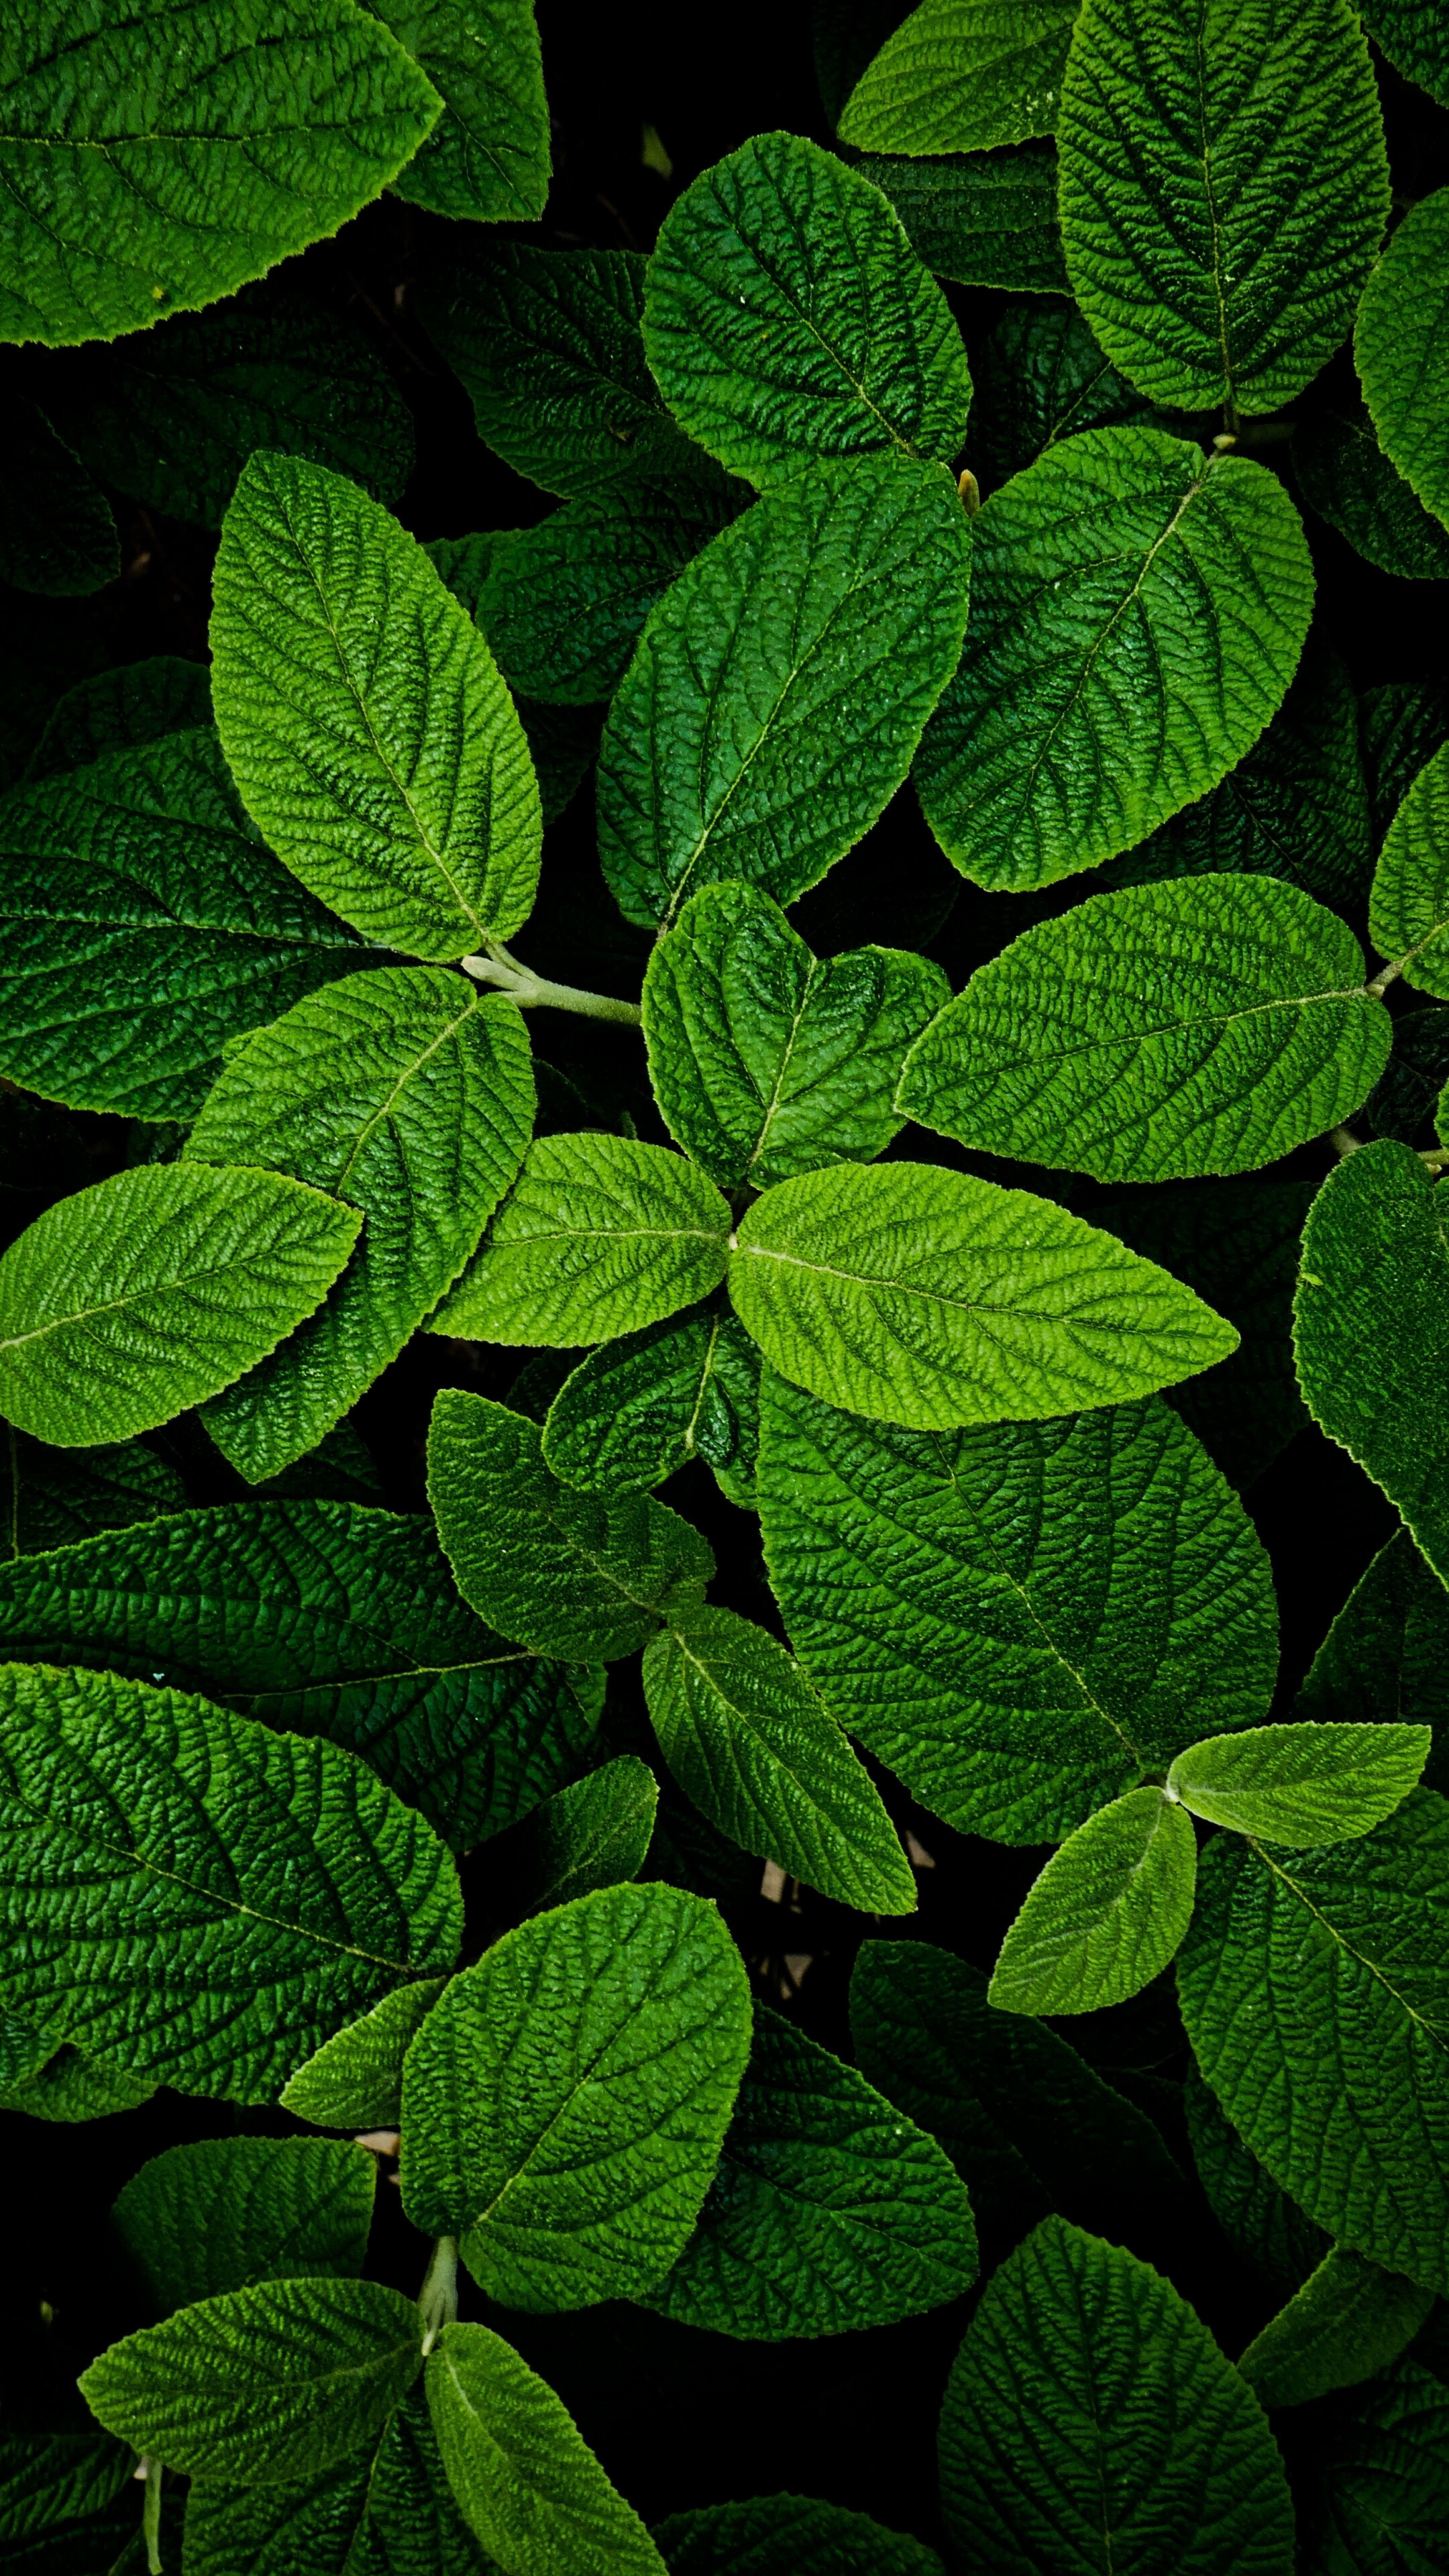 Go Green: Bright and green leaves, The ecological balance, An eco-friendly garden. 2160x3840 4K Wallpaper.